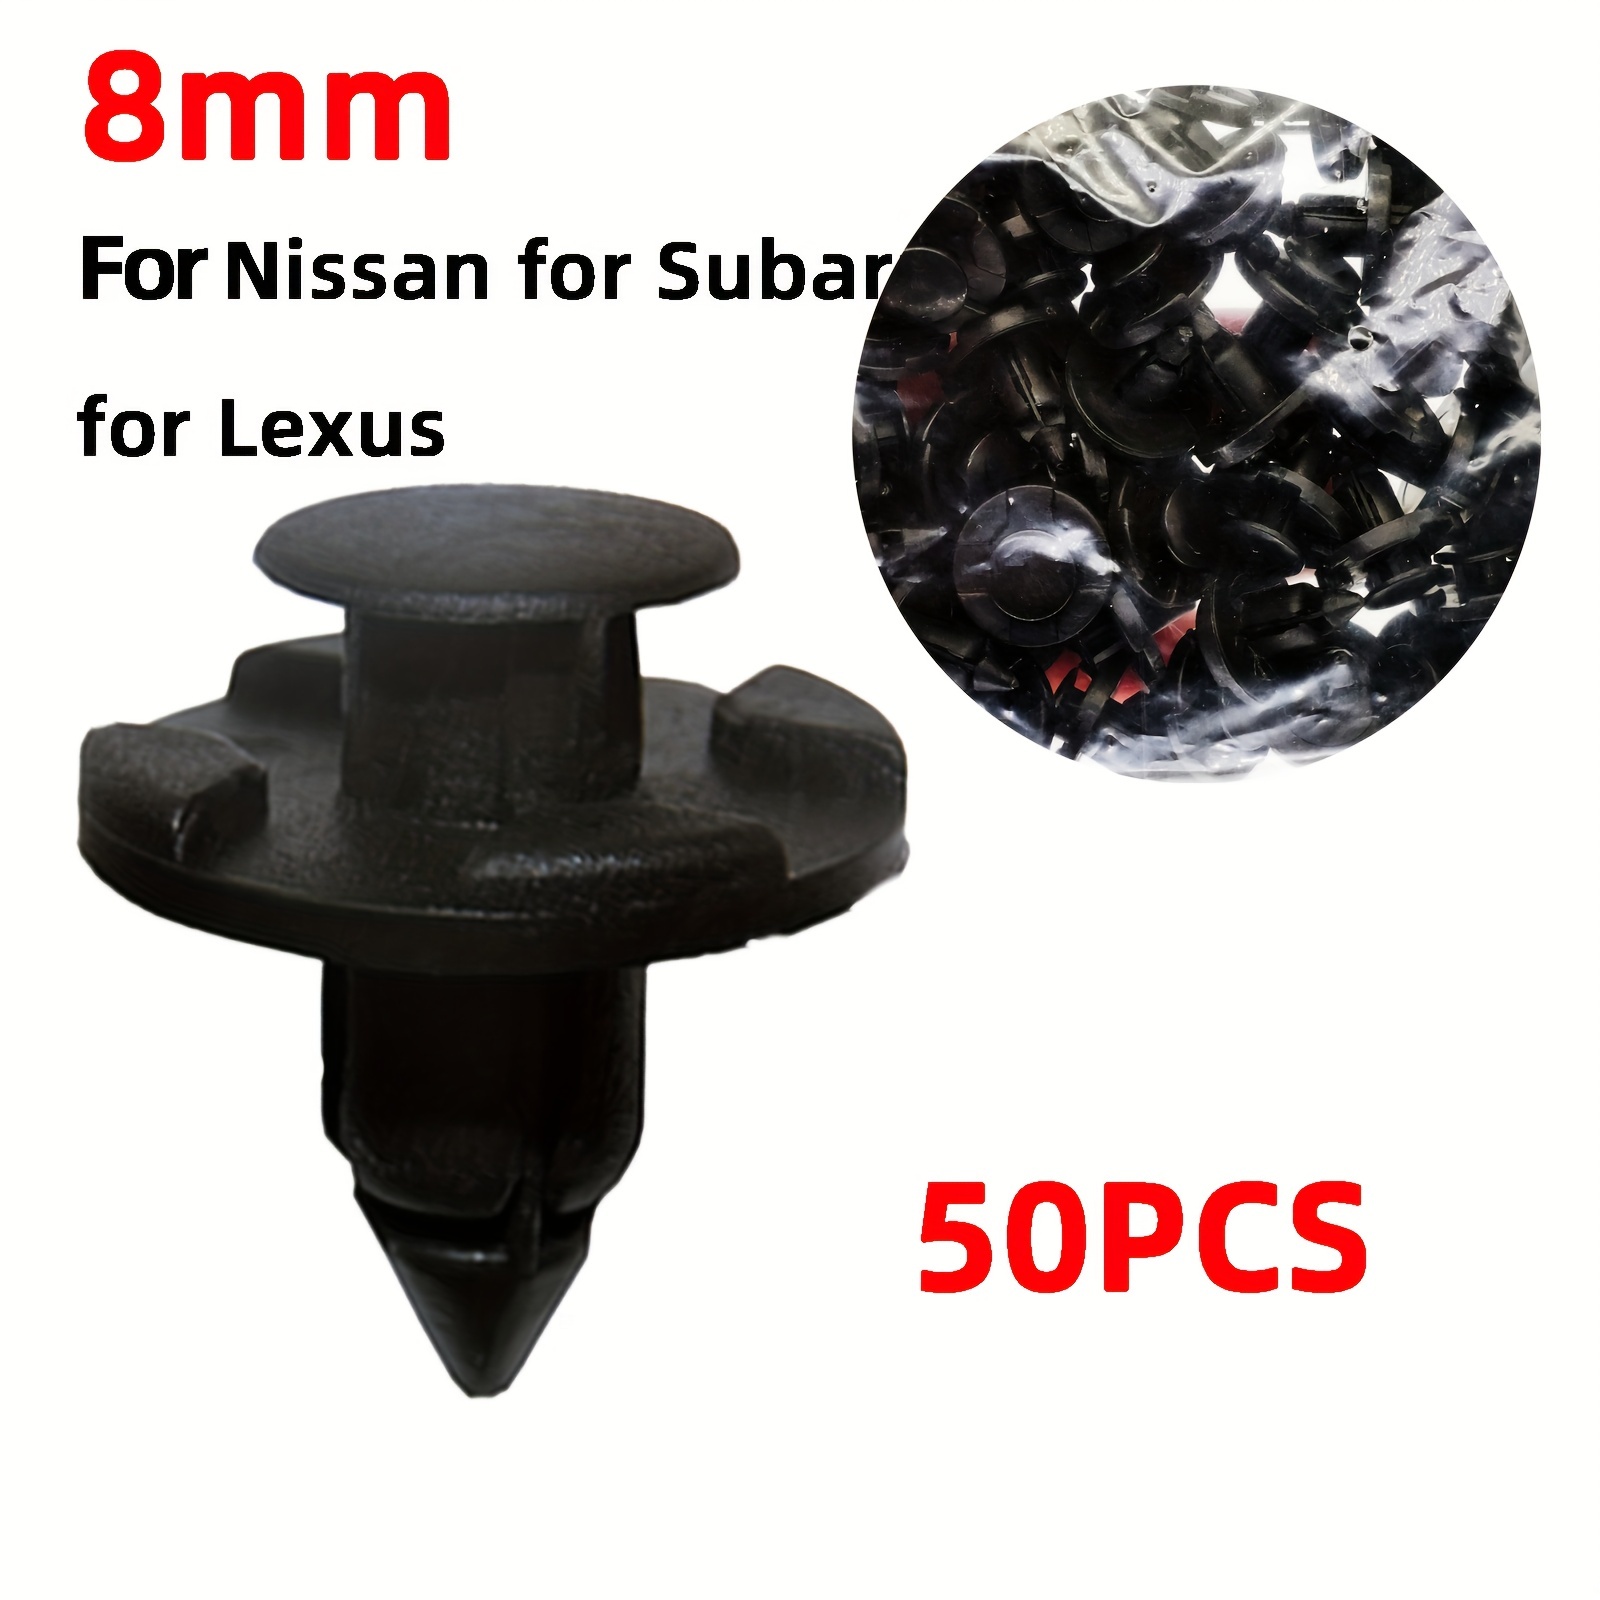 Nissan Push Retainer Clips - Fits 6mm Hole